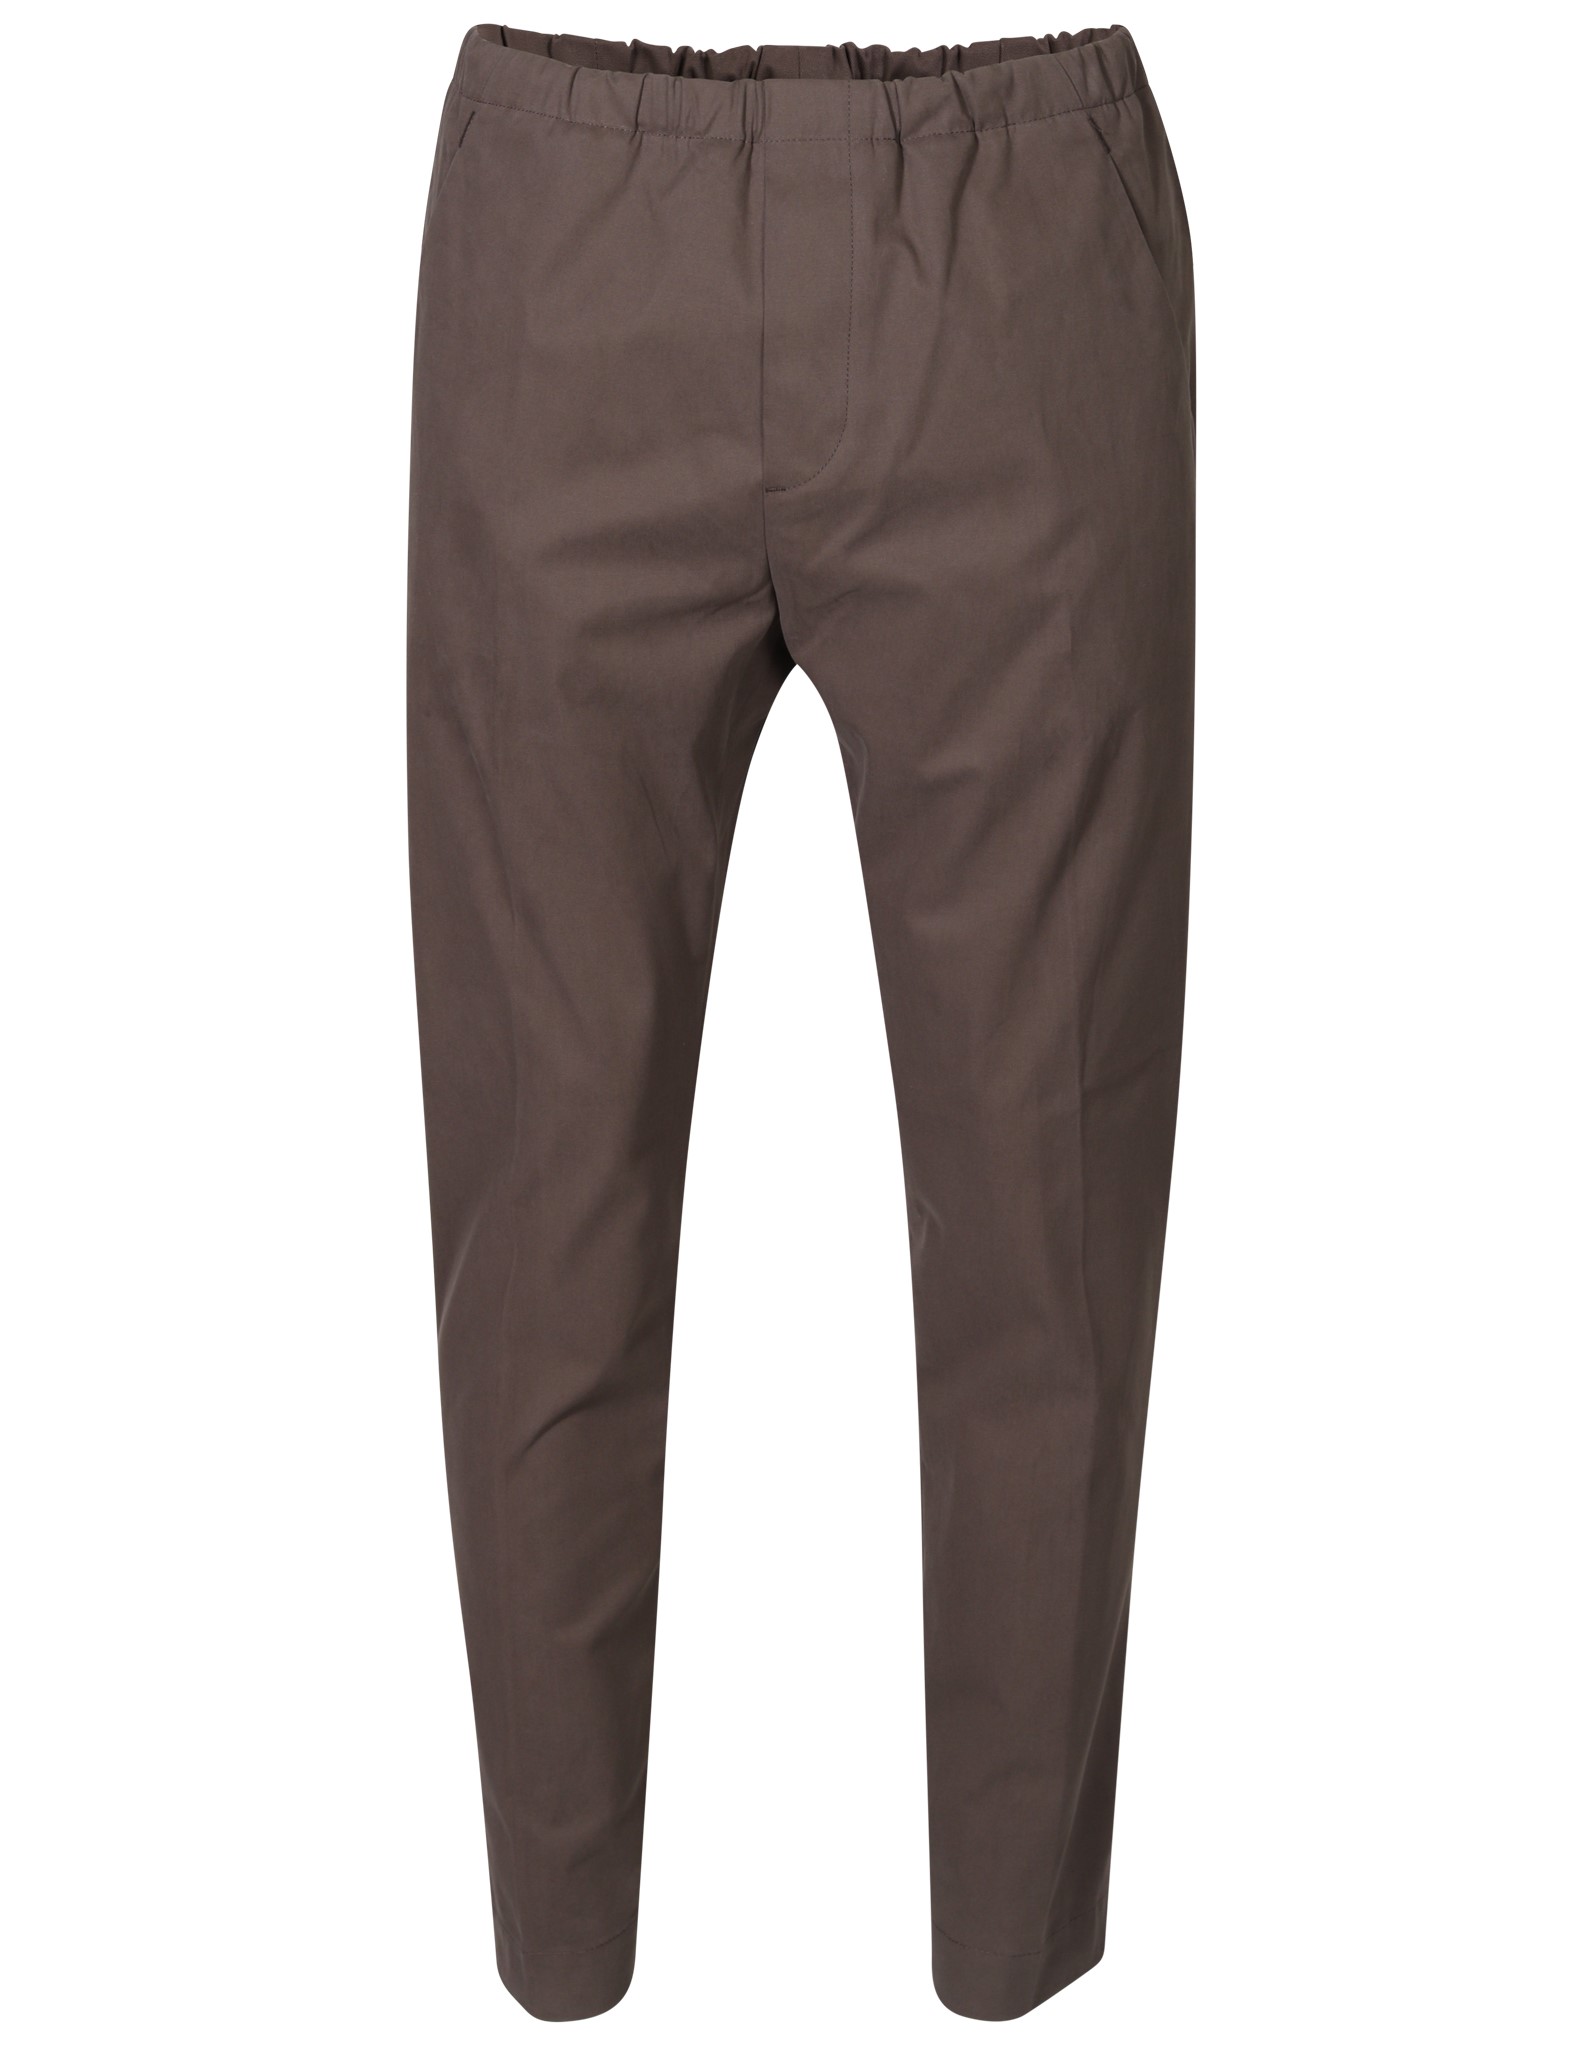 NINE:INTHE:MORNING Mirco Carrot Cotton Stretch Pant in Brown